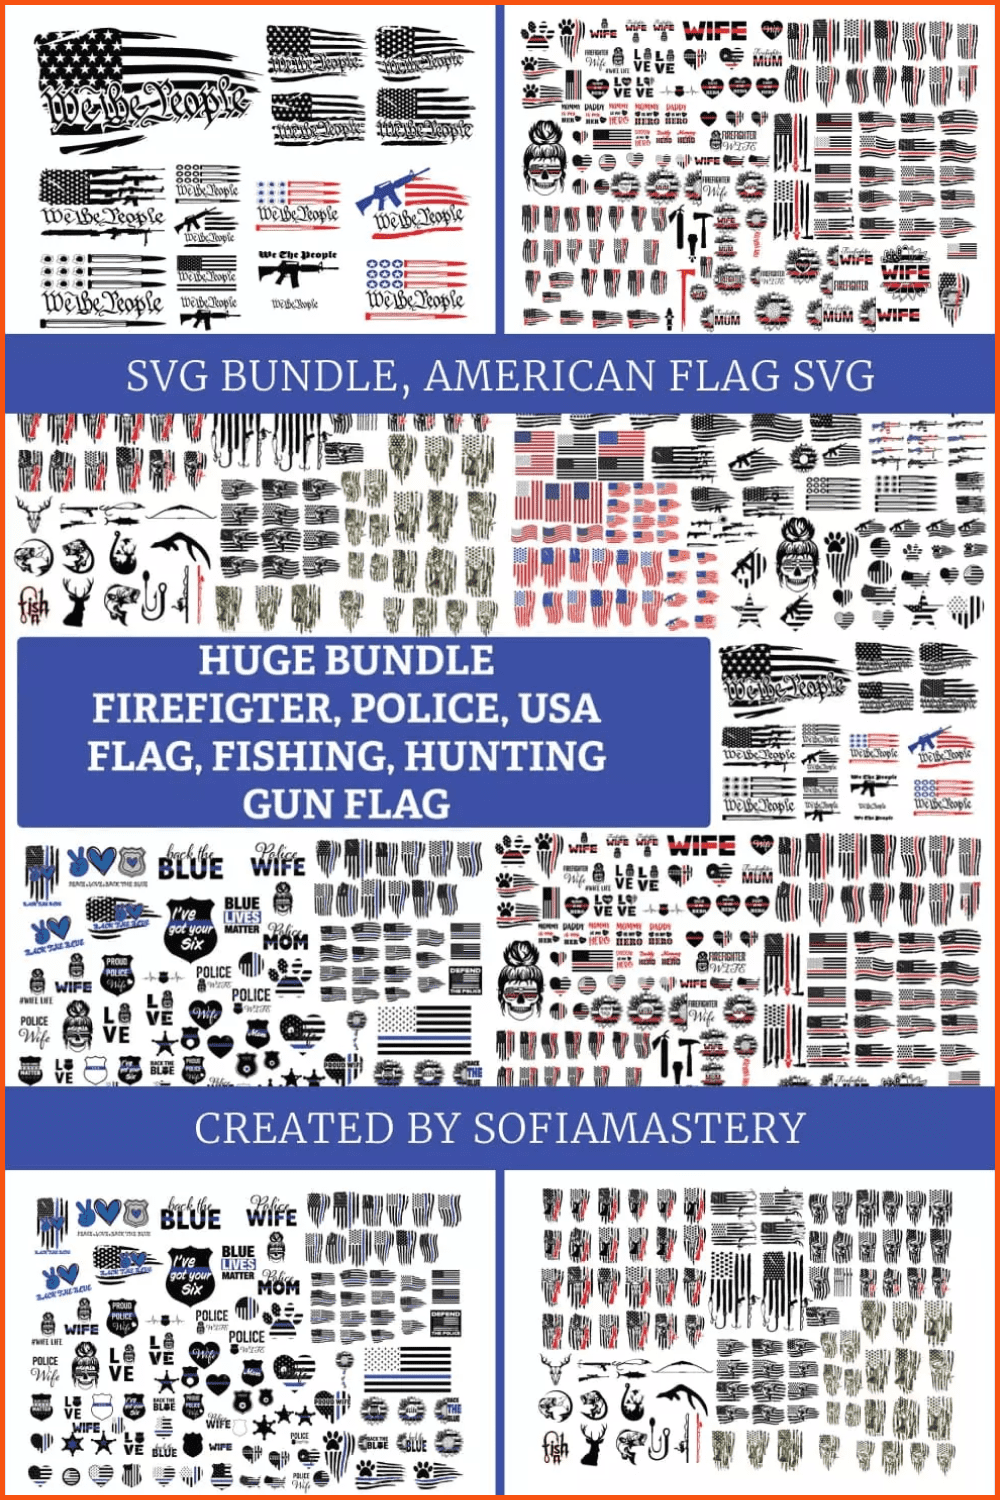 Collage of sticker images of american flag variations.